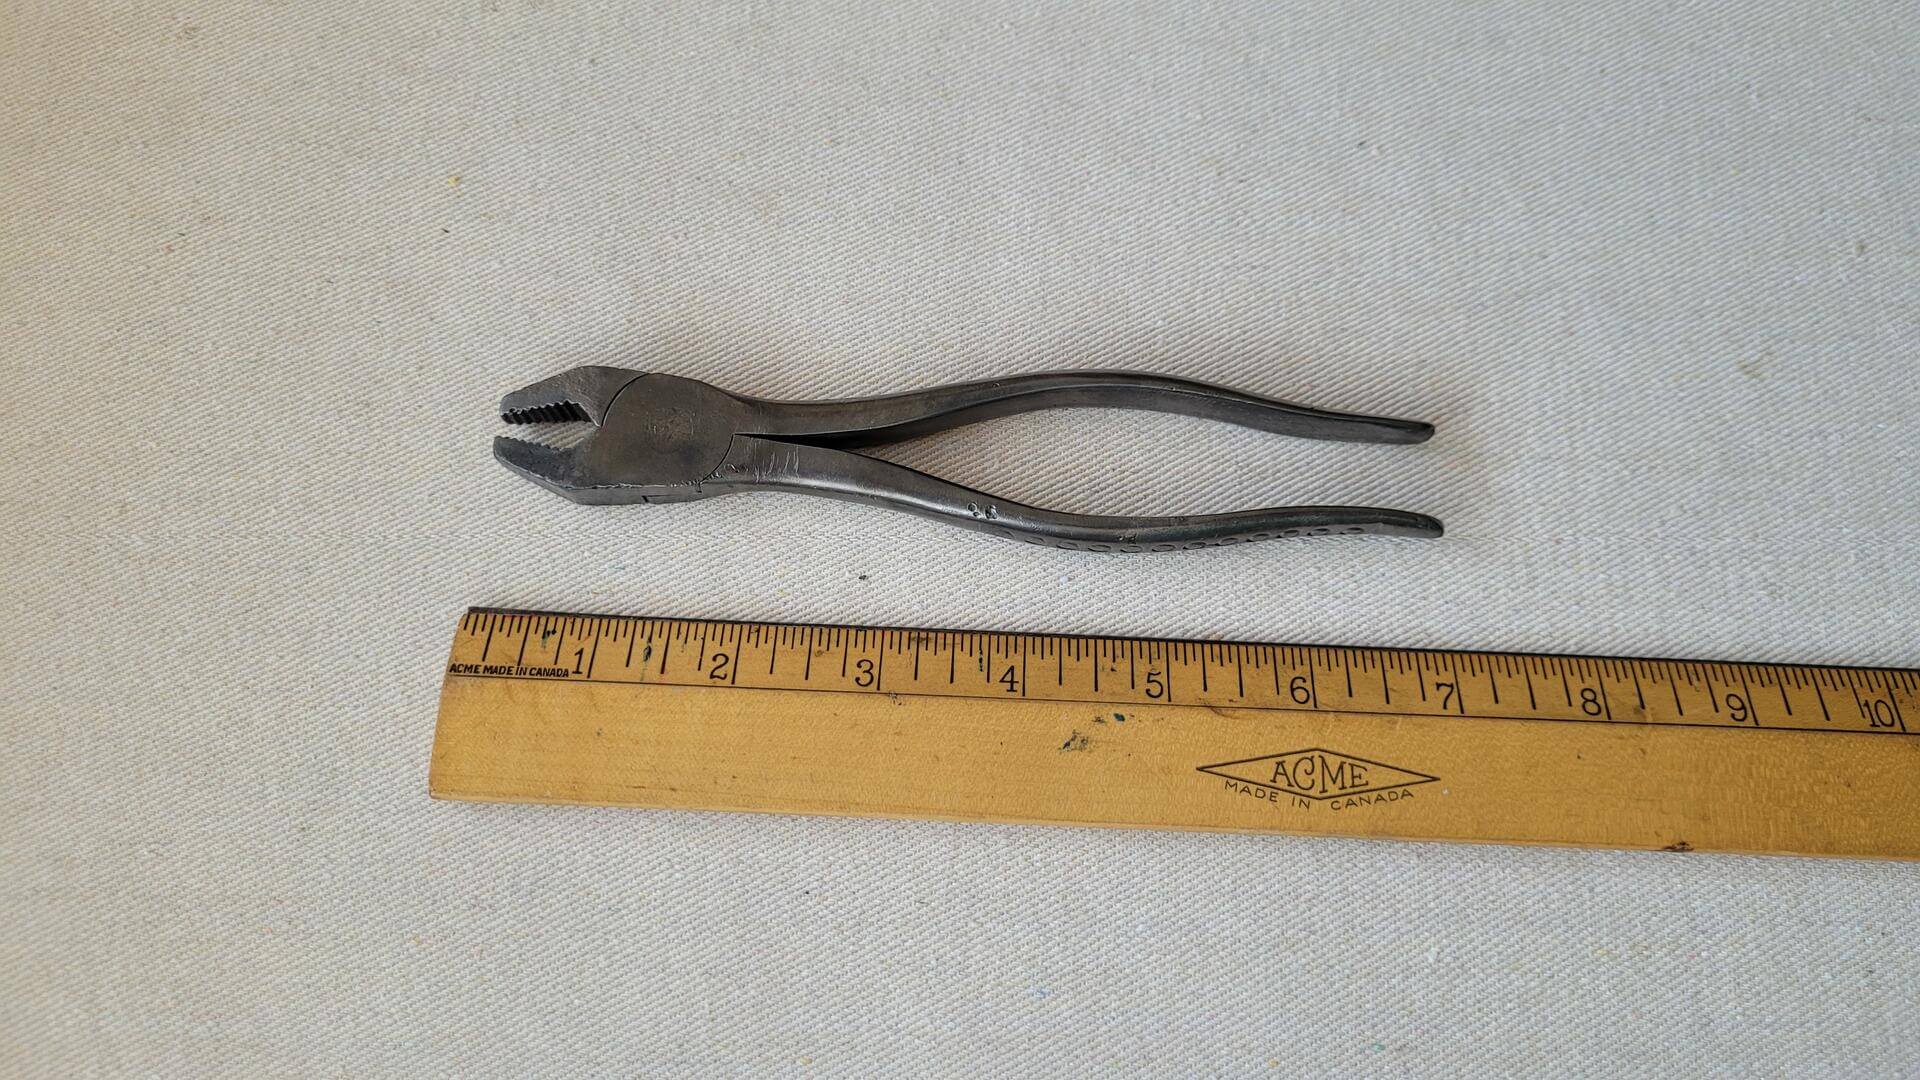 Pre Snap On Vacuum Grip No. 7 battery pliers by Forged Steel Products Company from Newport, PA. Antique made in USA automotive mechanic hand tools